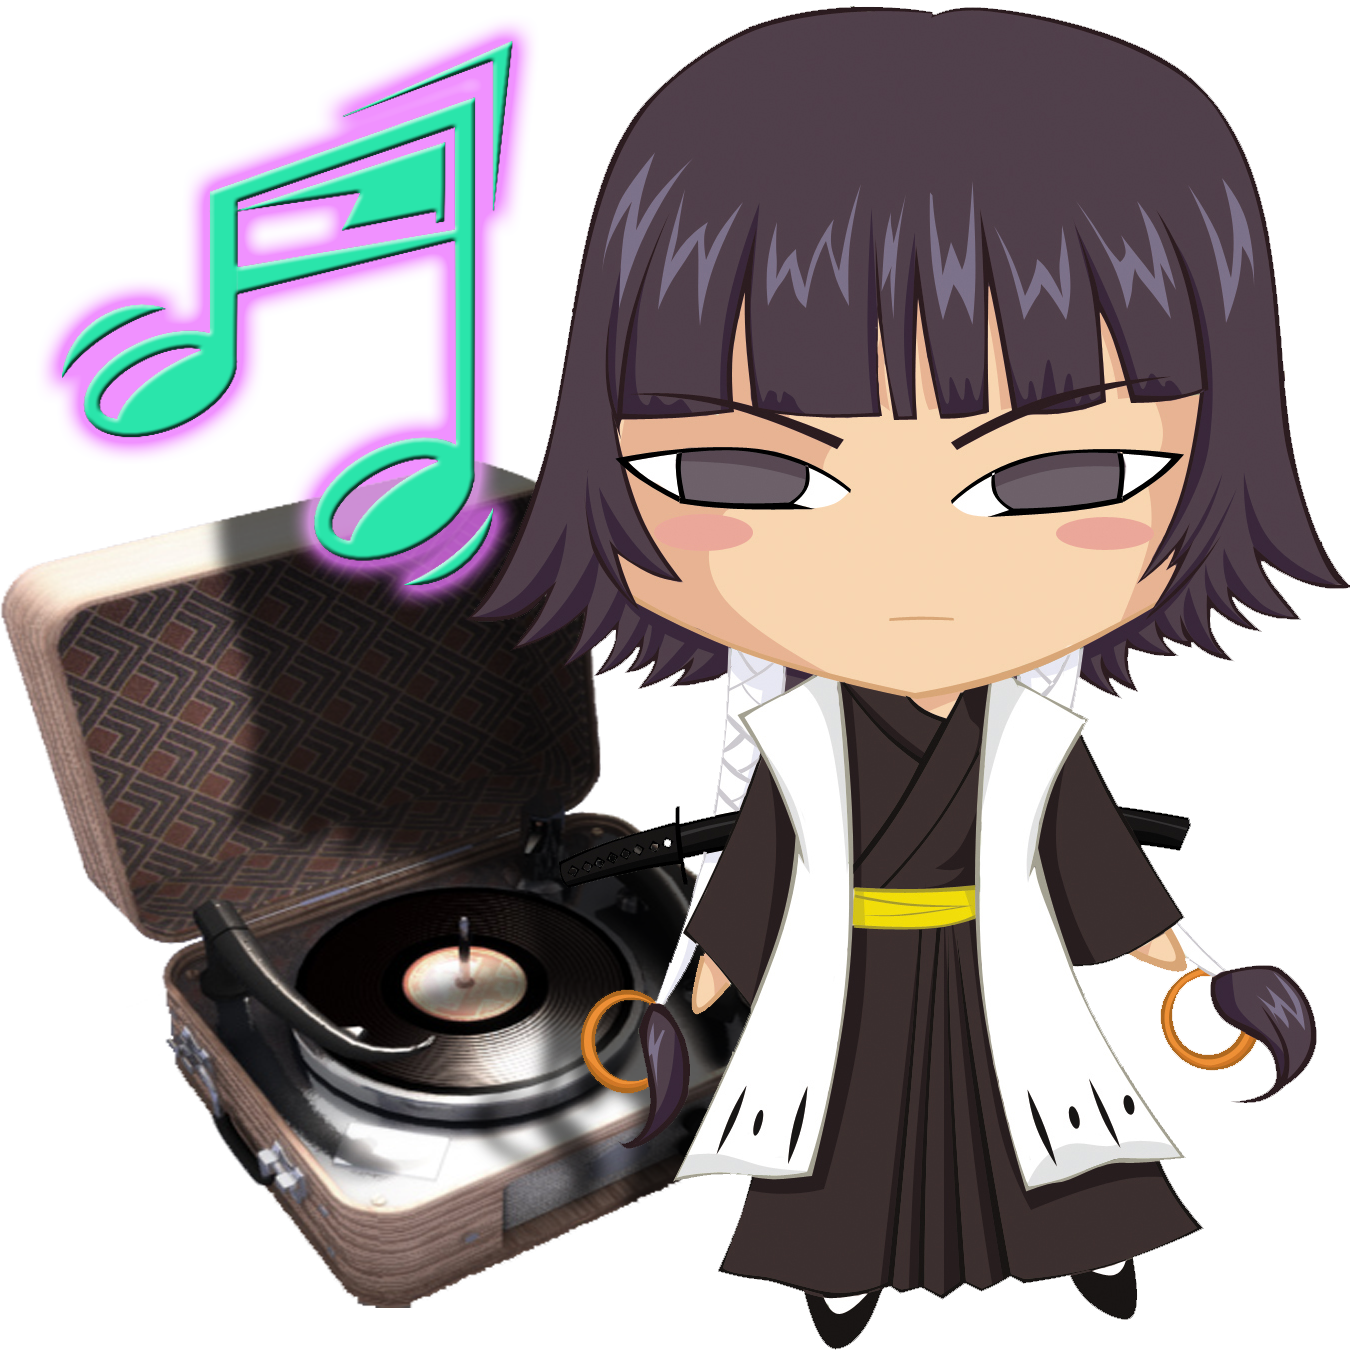 Animated D J Characterwith Vinyl Record Player PNG image